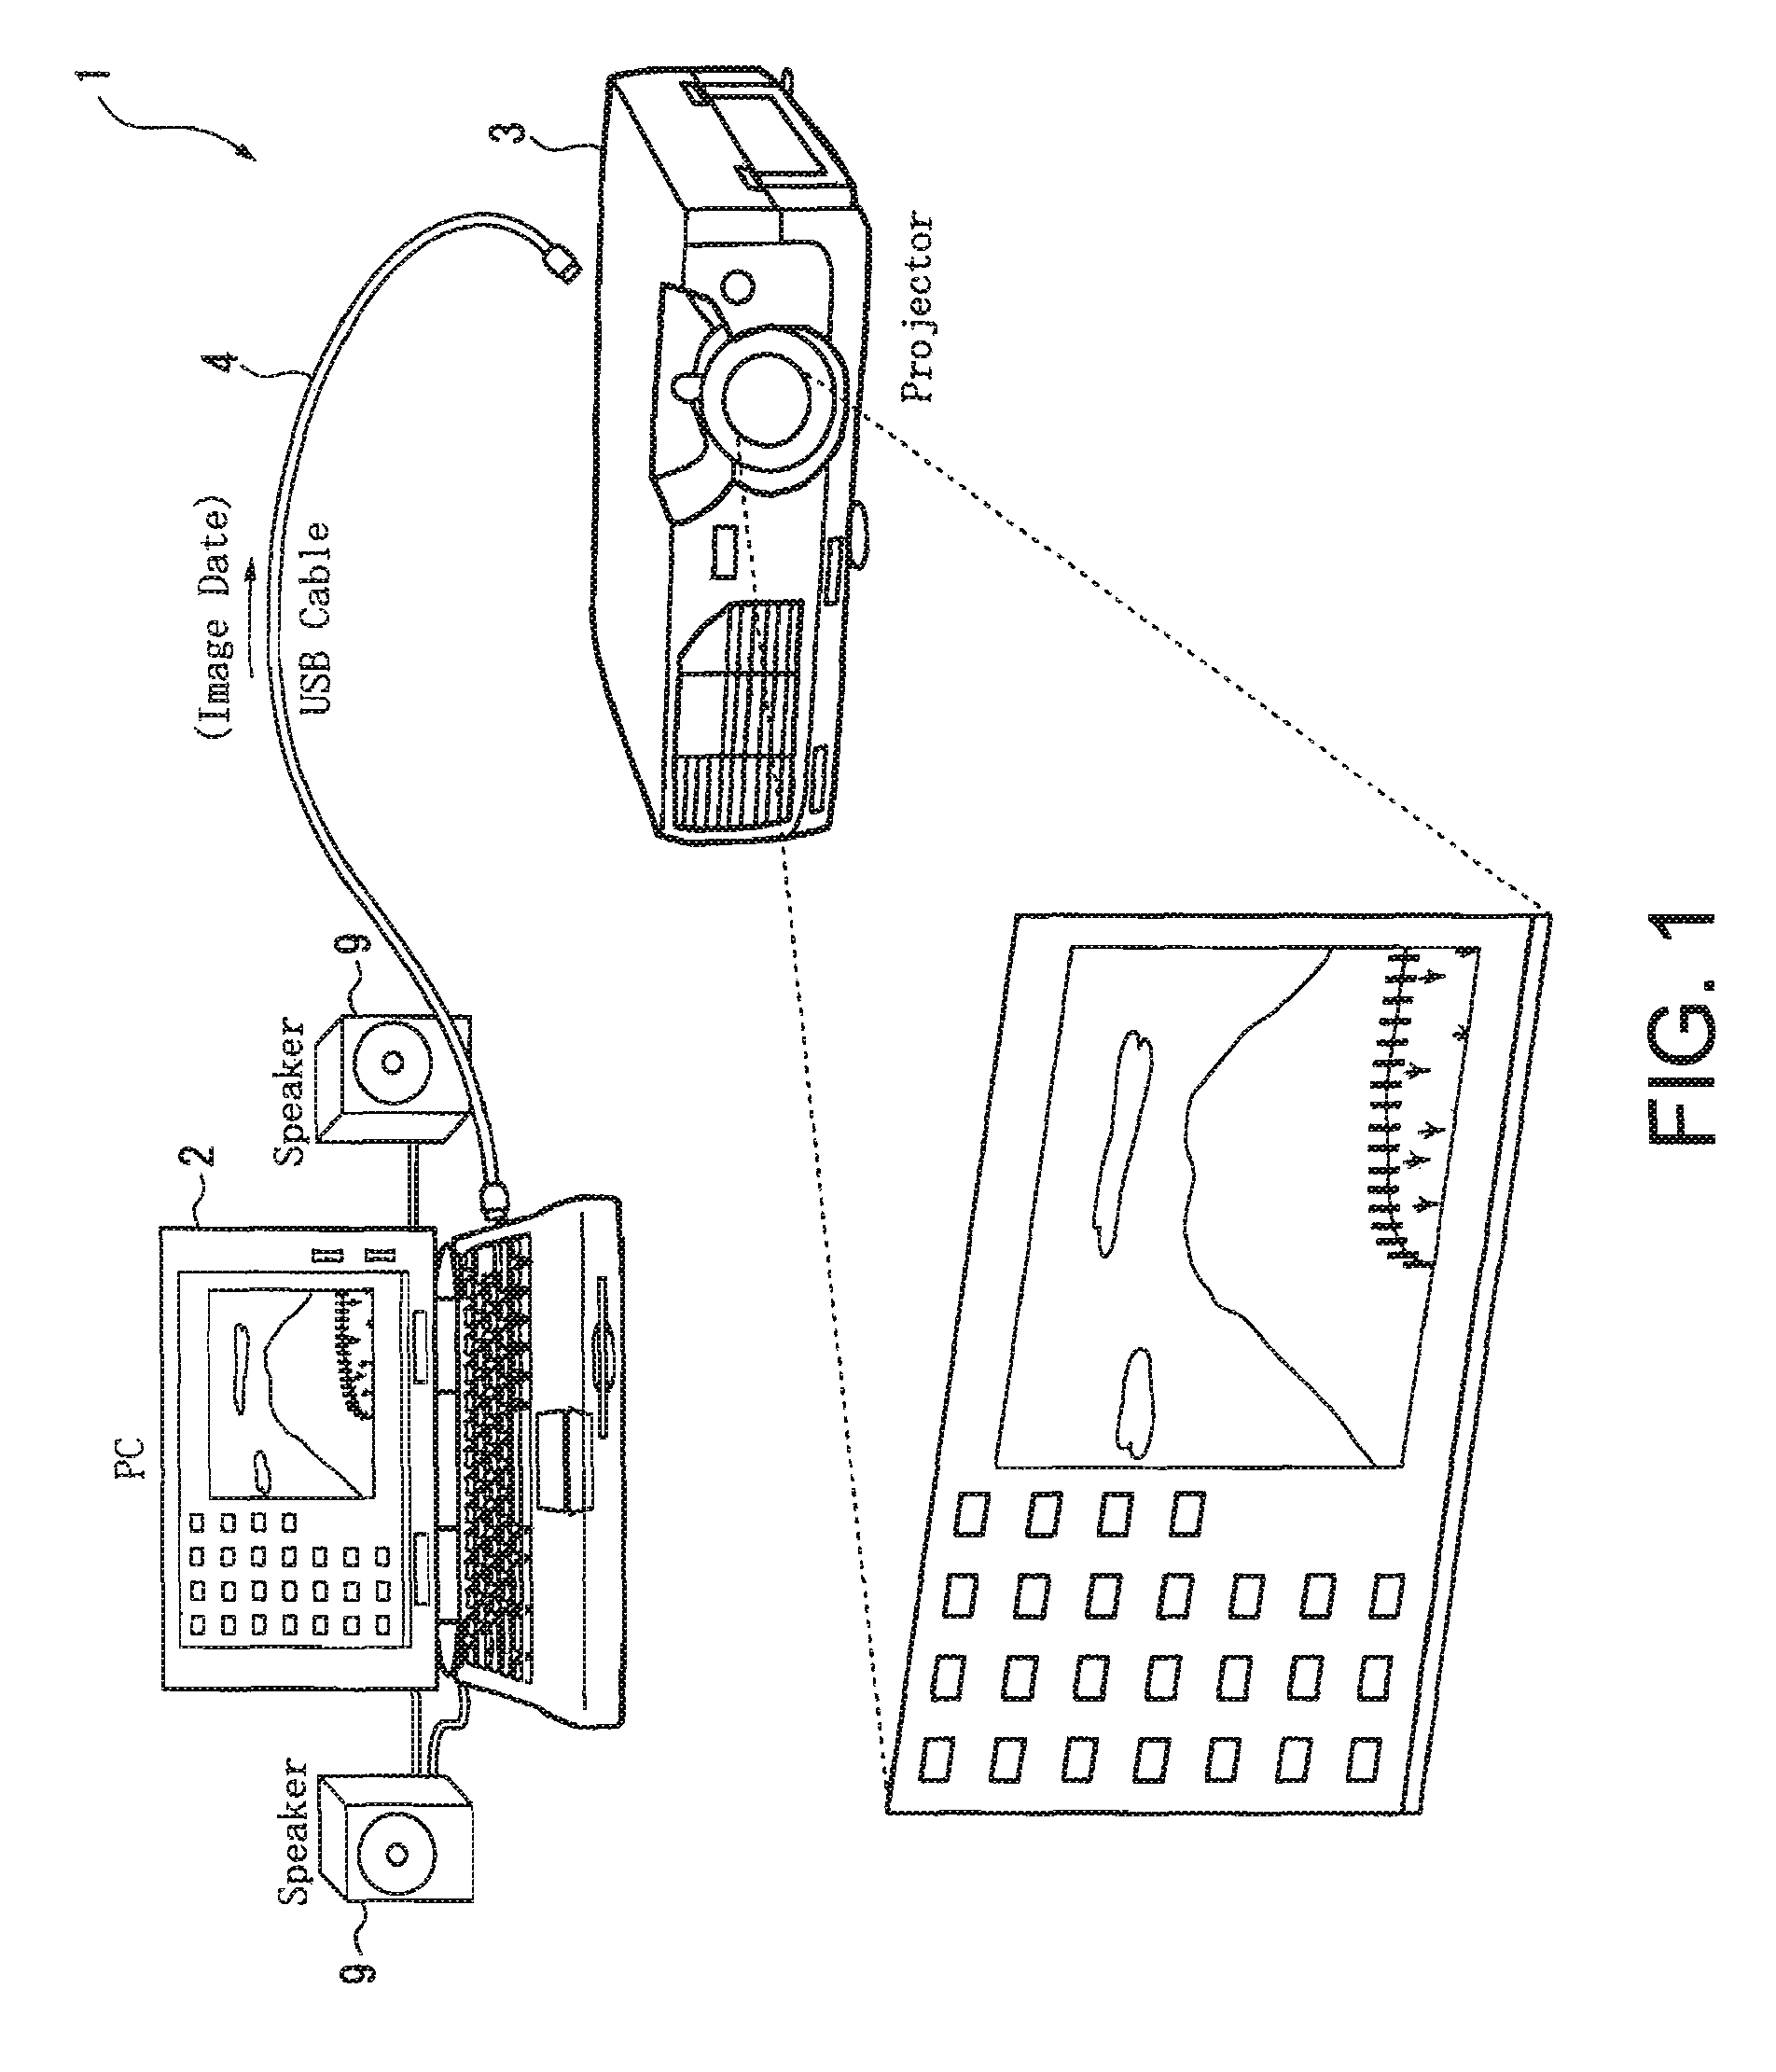 Image and sound output system, image and sound data output device, and recording medium